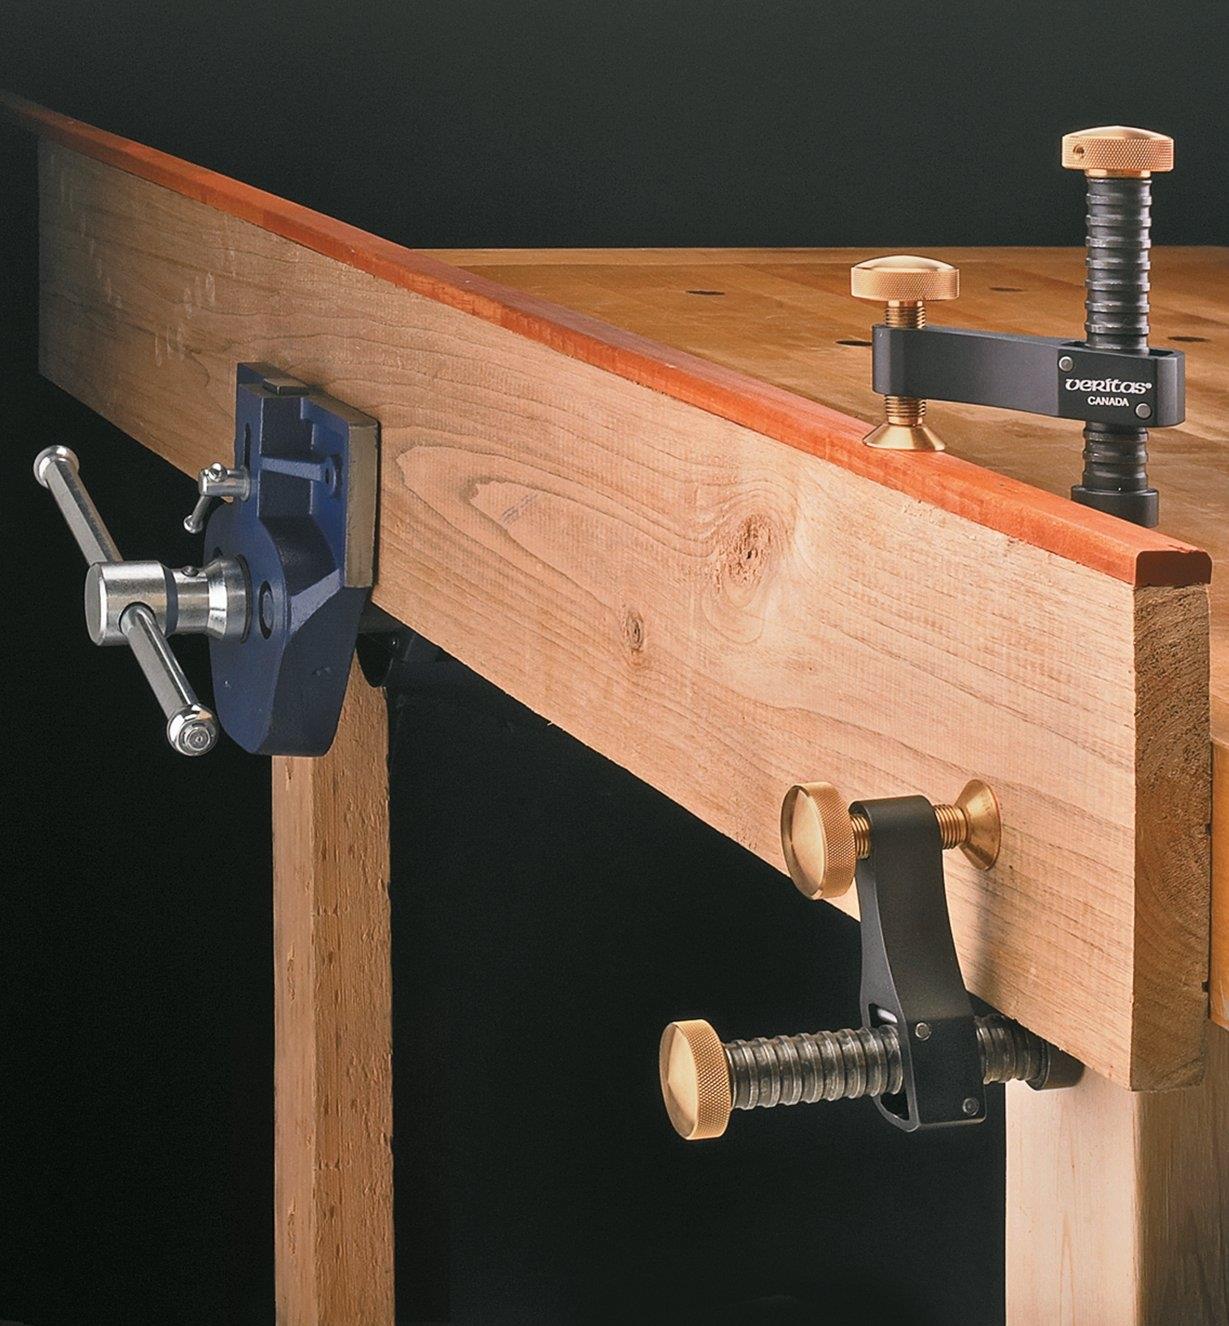 Two Veritas Surface Clamps supporting the end of a board that is clamped in a vise